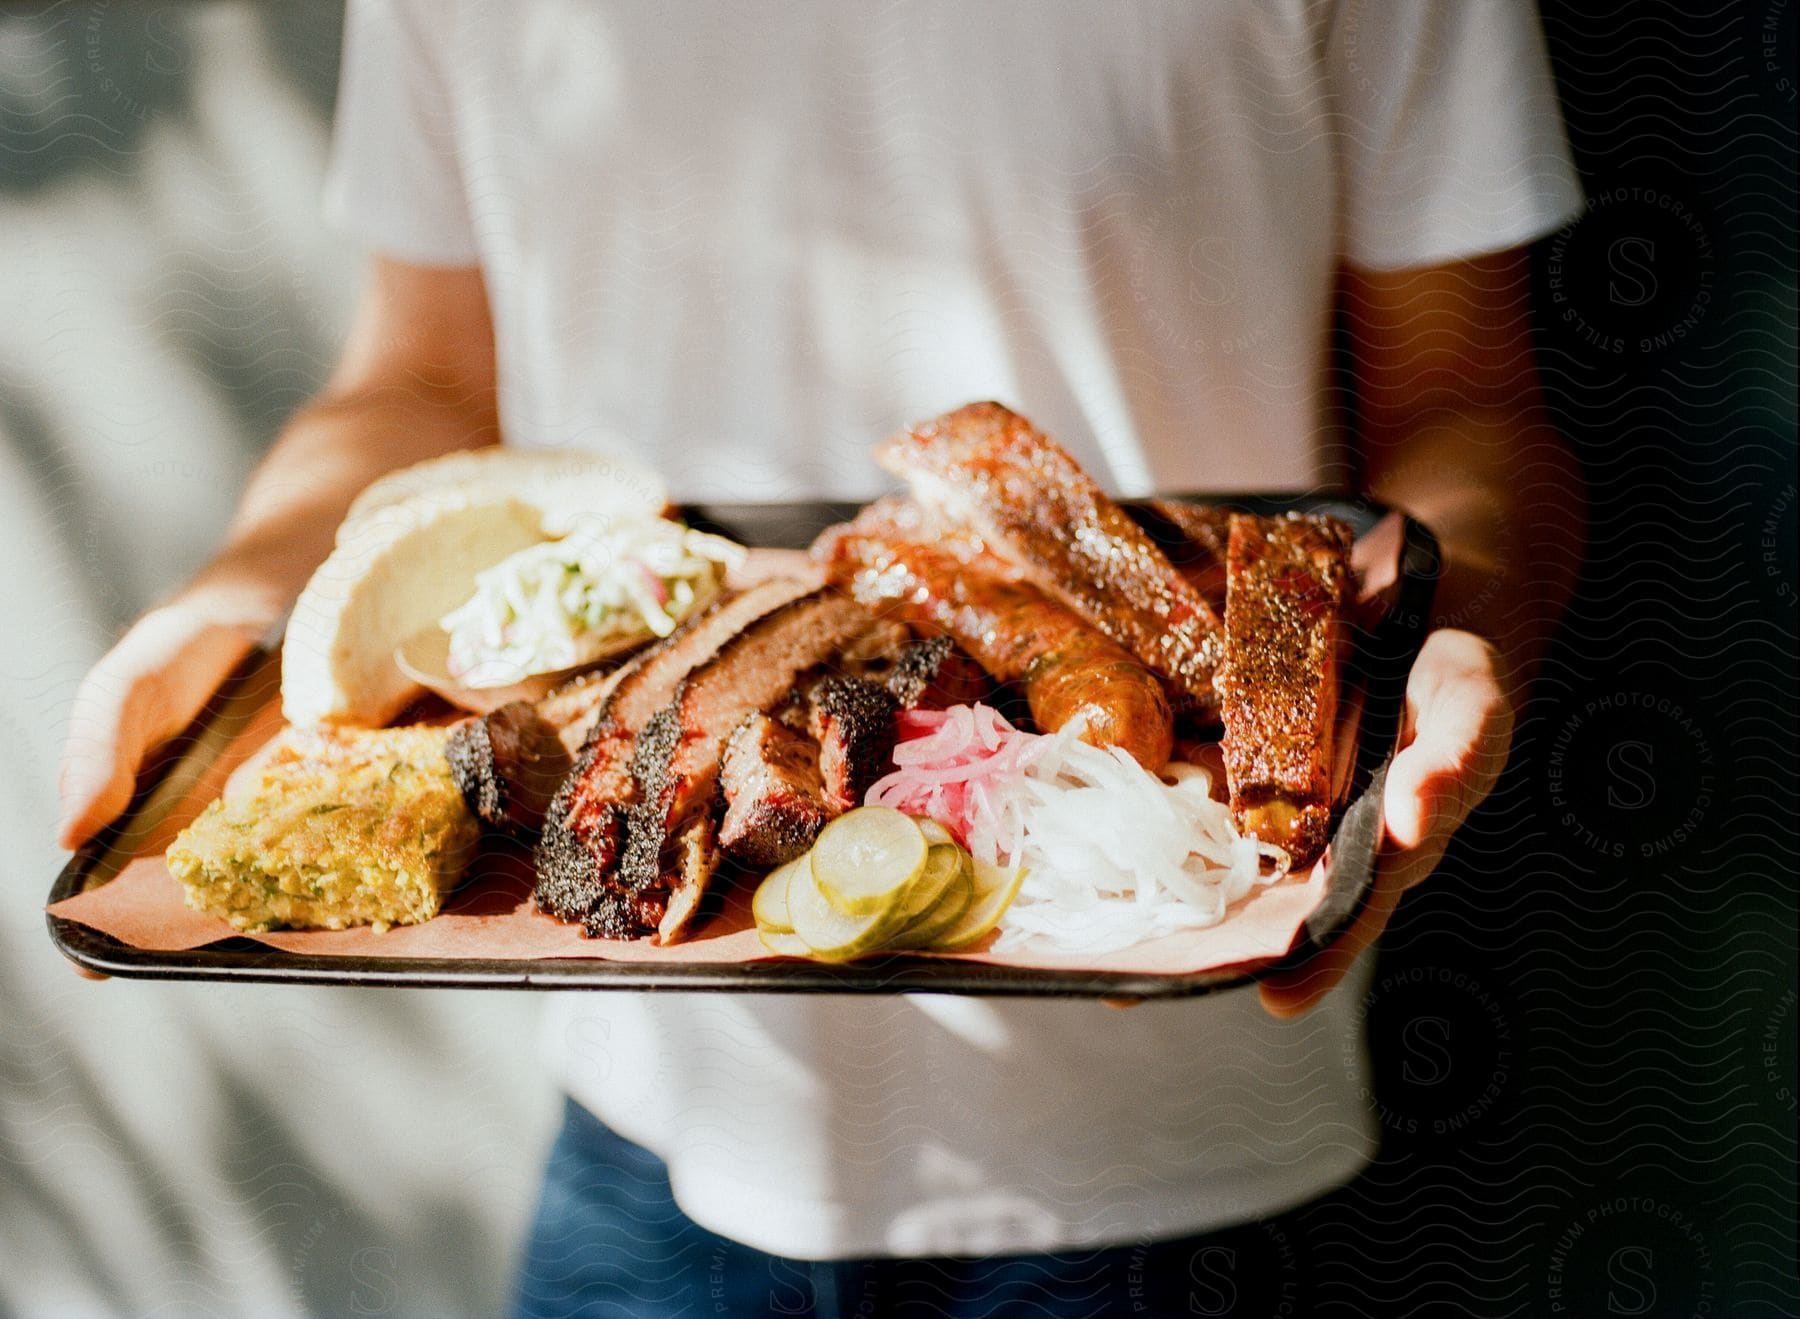 Person stands holding tray ladden with a meal containing barbecued meat.